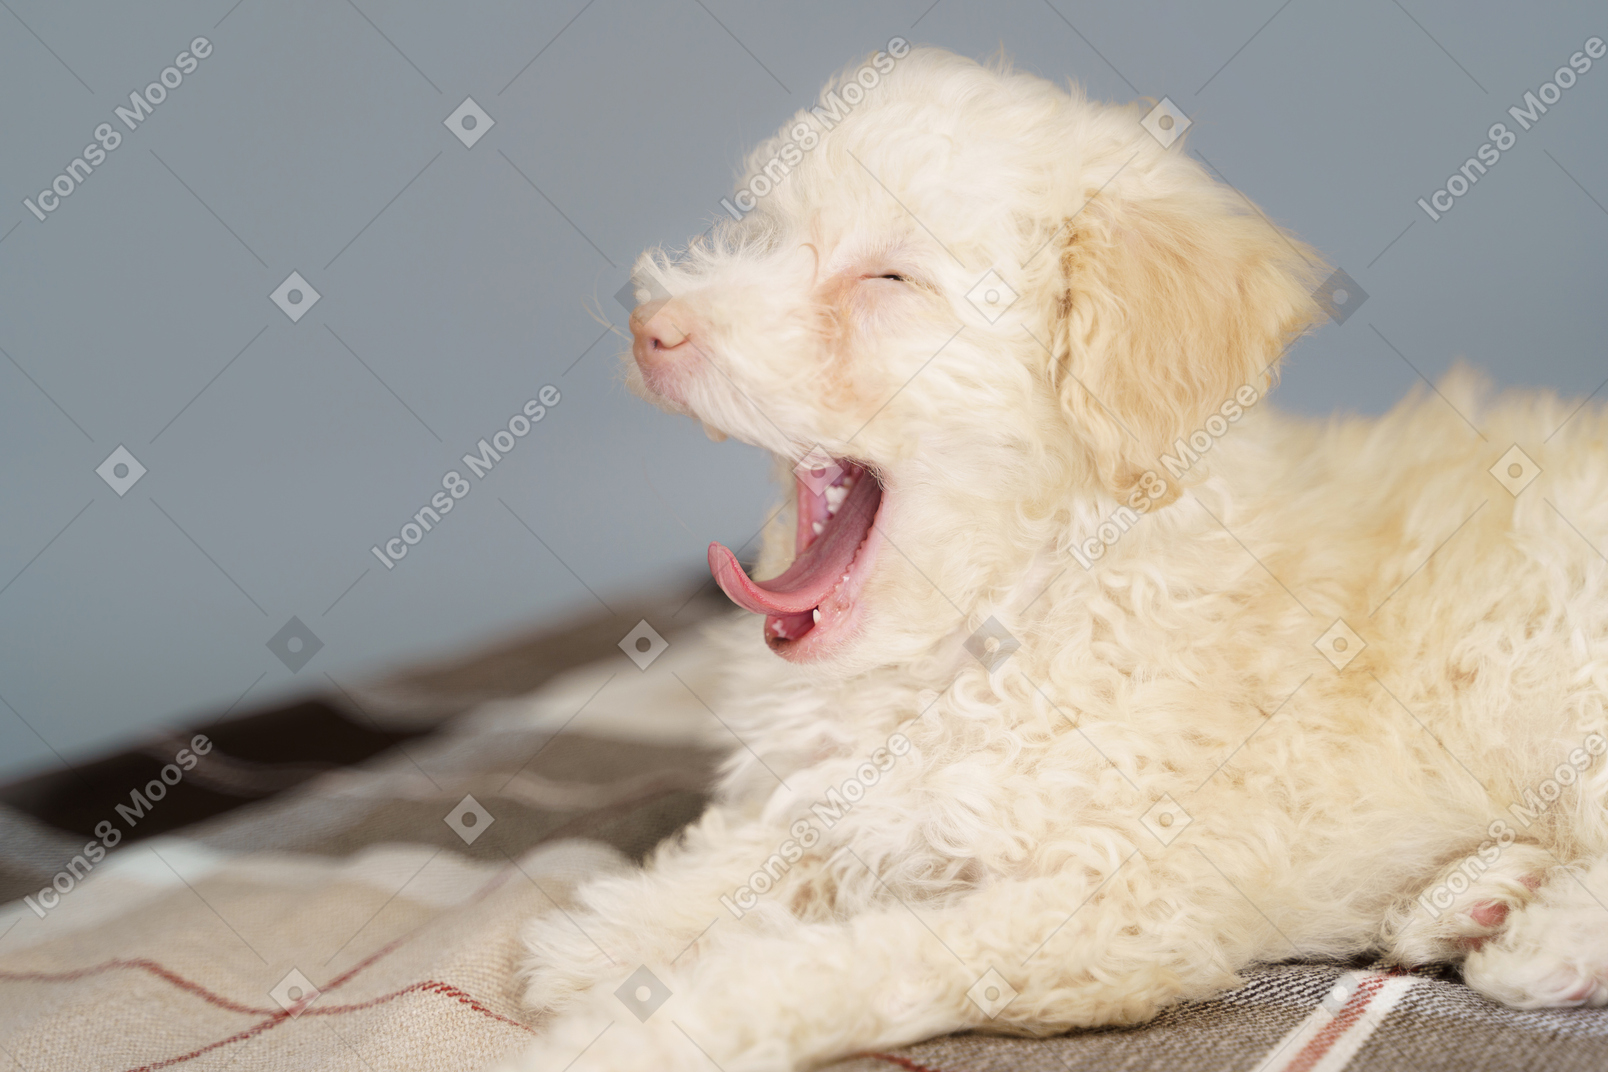 Side view of a tiny puppy lying on a checked blanket and yawning